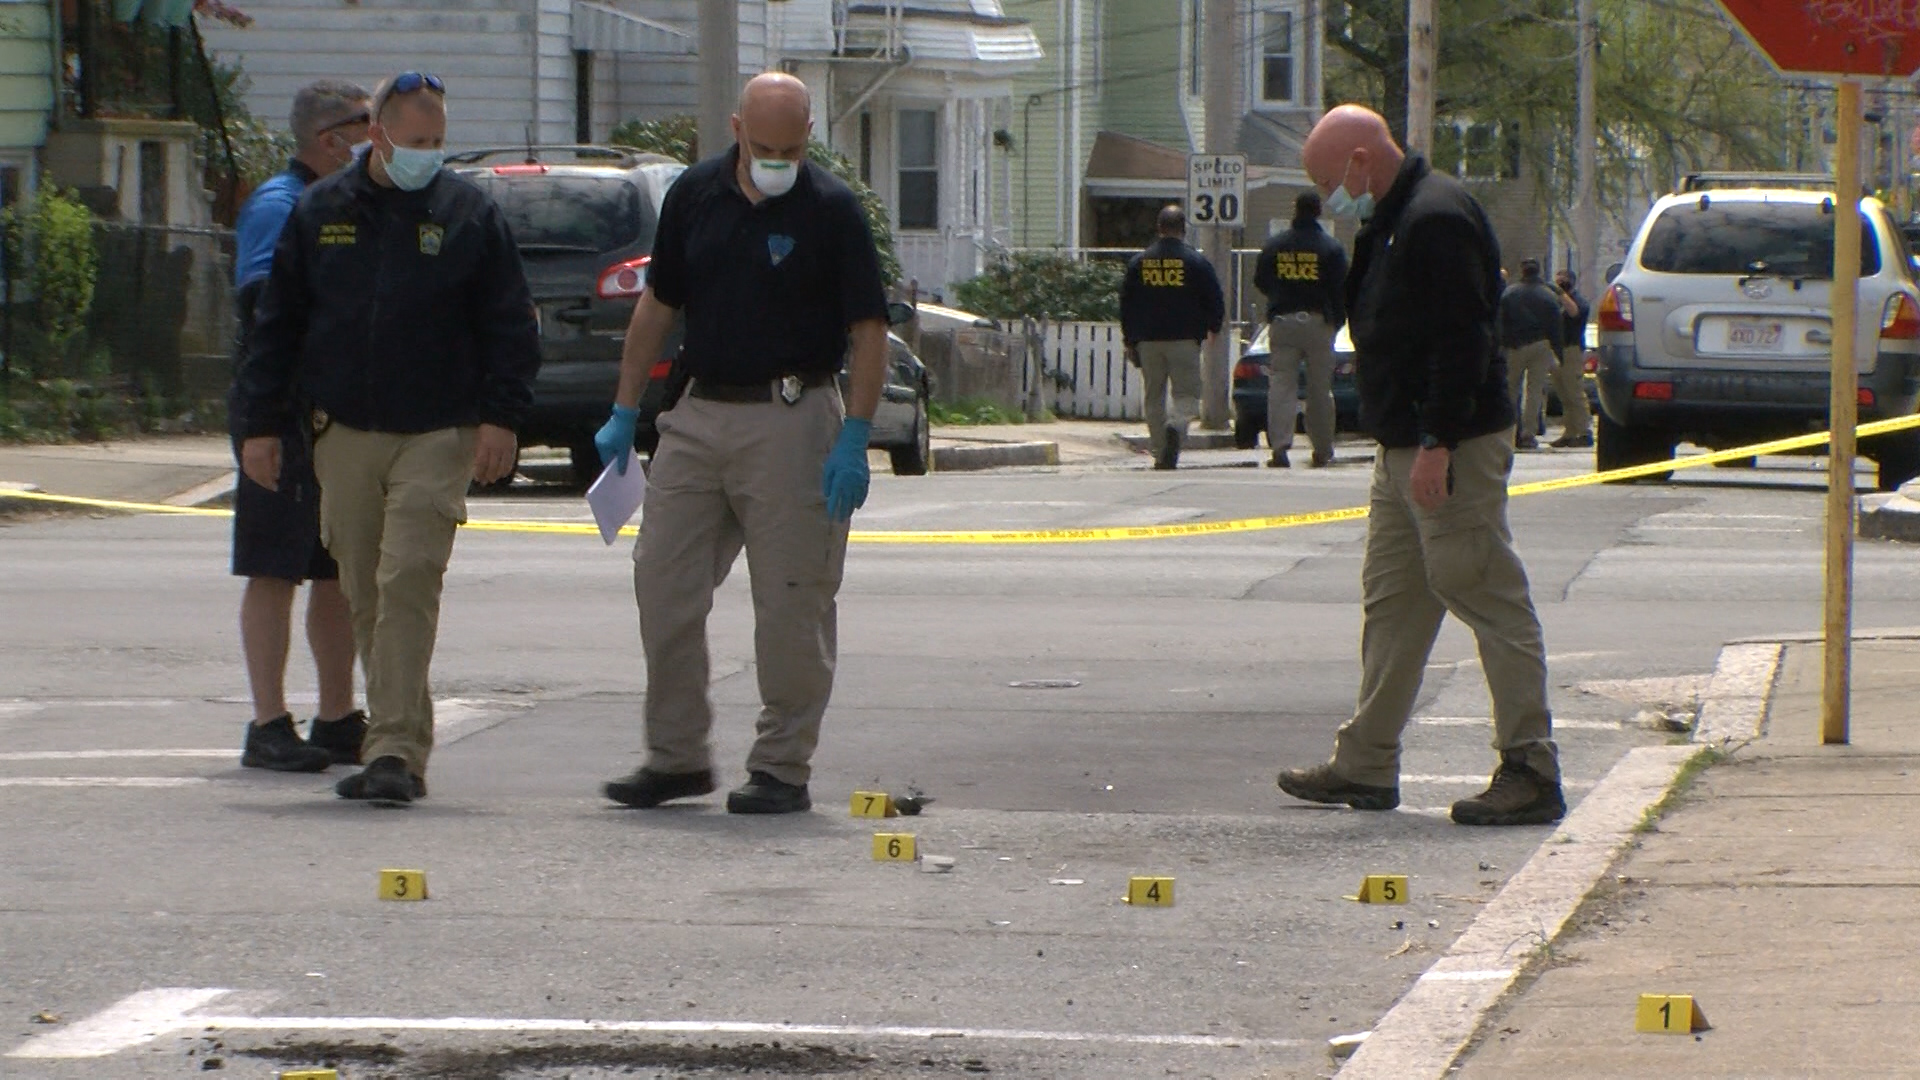 Update Suspect arrested, charged with murder in Fall River shooting ABC6